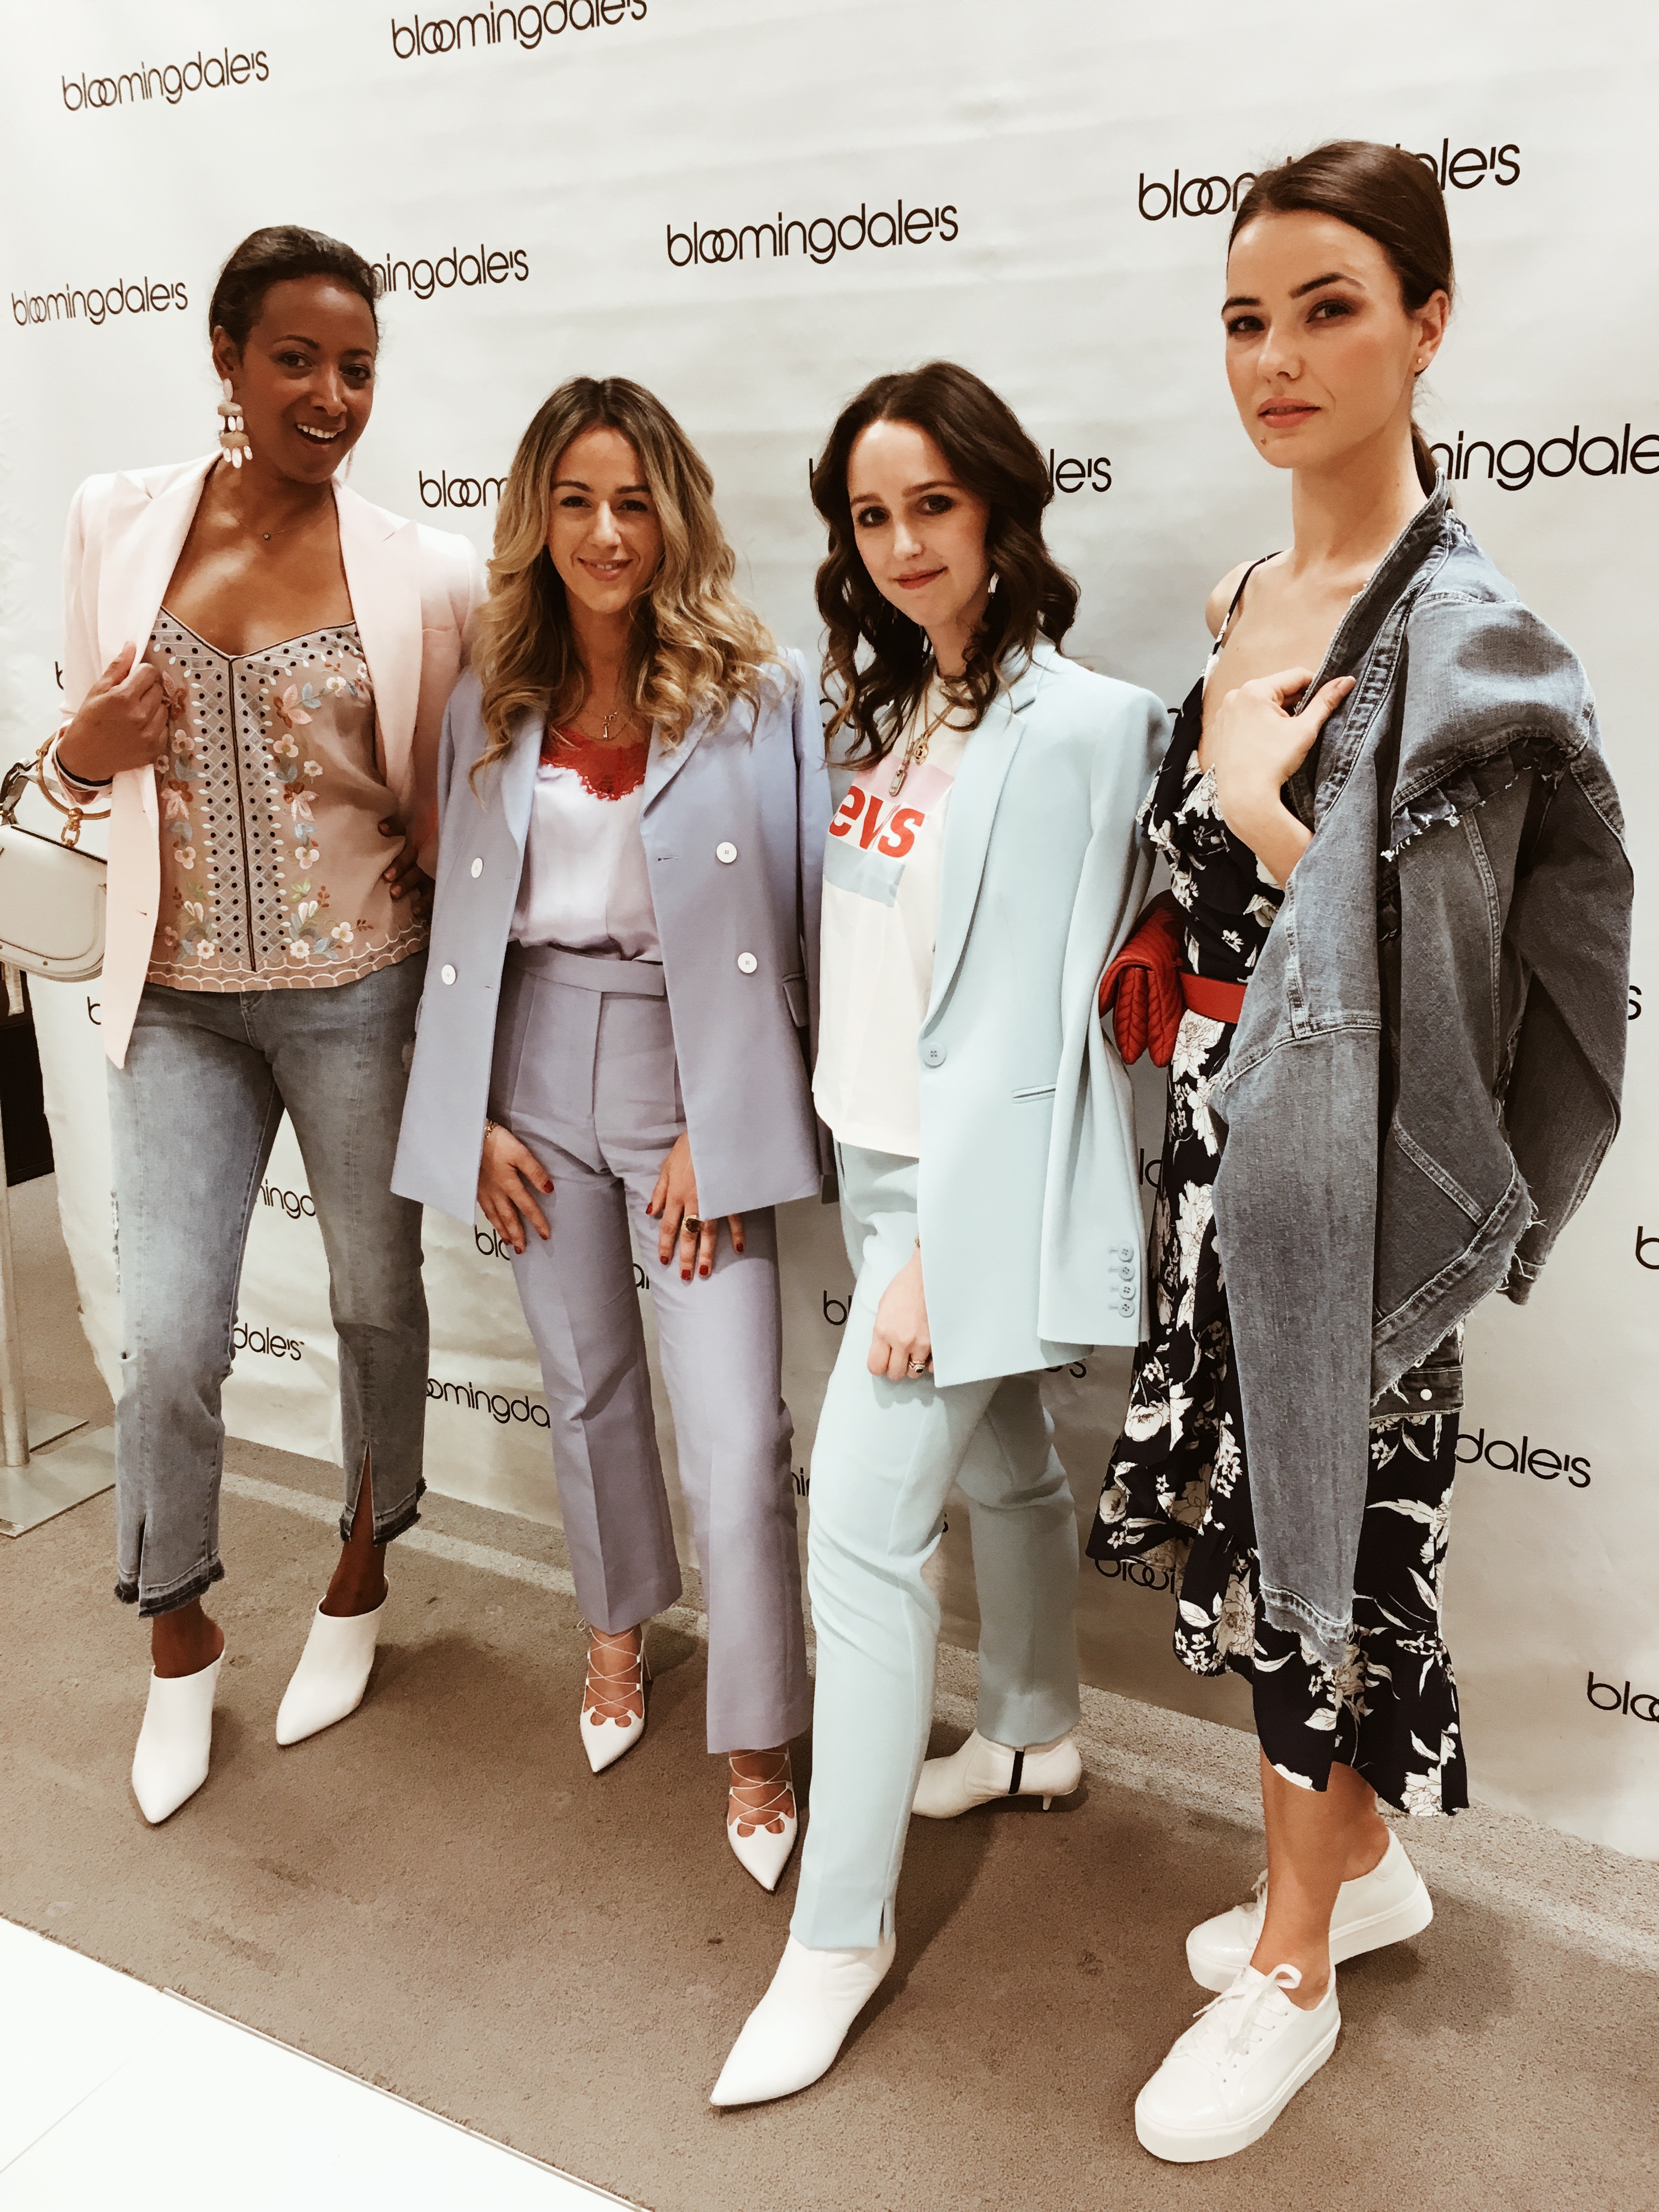 Bloomingdales Hot Fashion Show-suiting-spring trends-mood board-style-shop the post